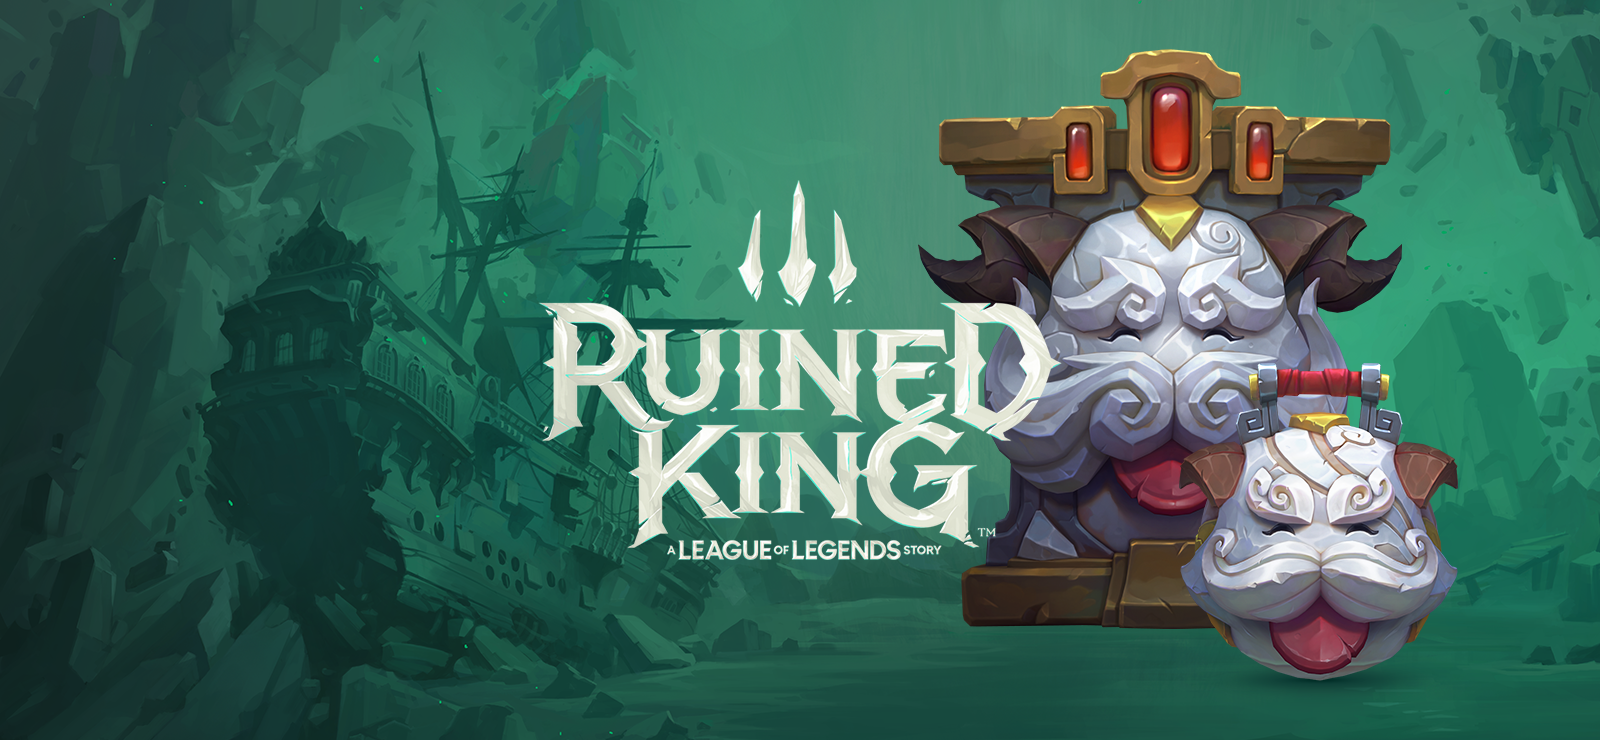 Ruined King: Lost & Found Weapon Pack